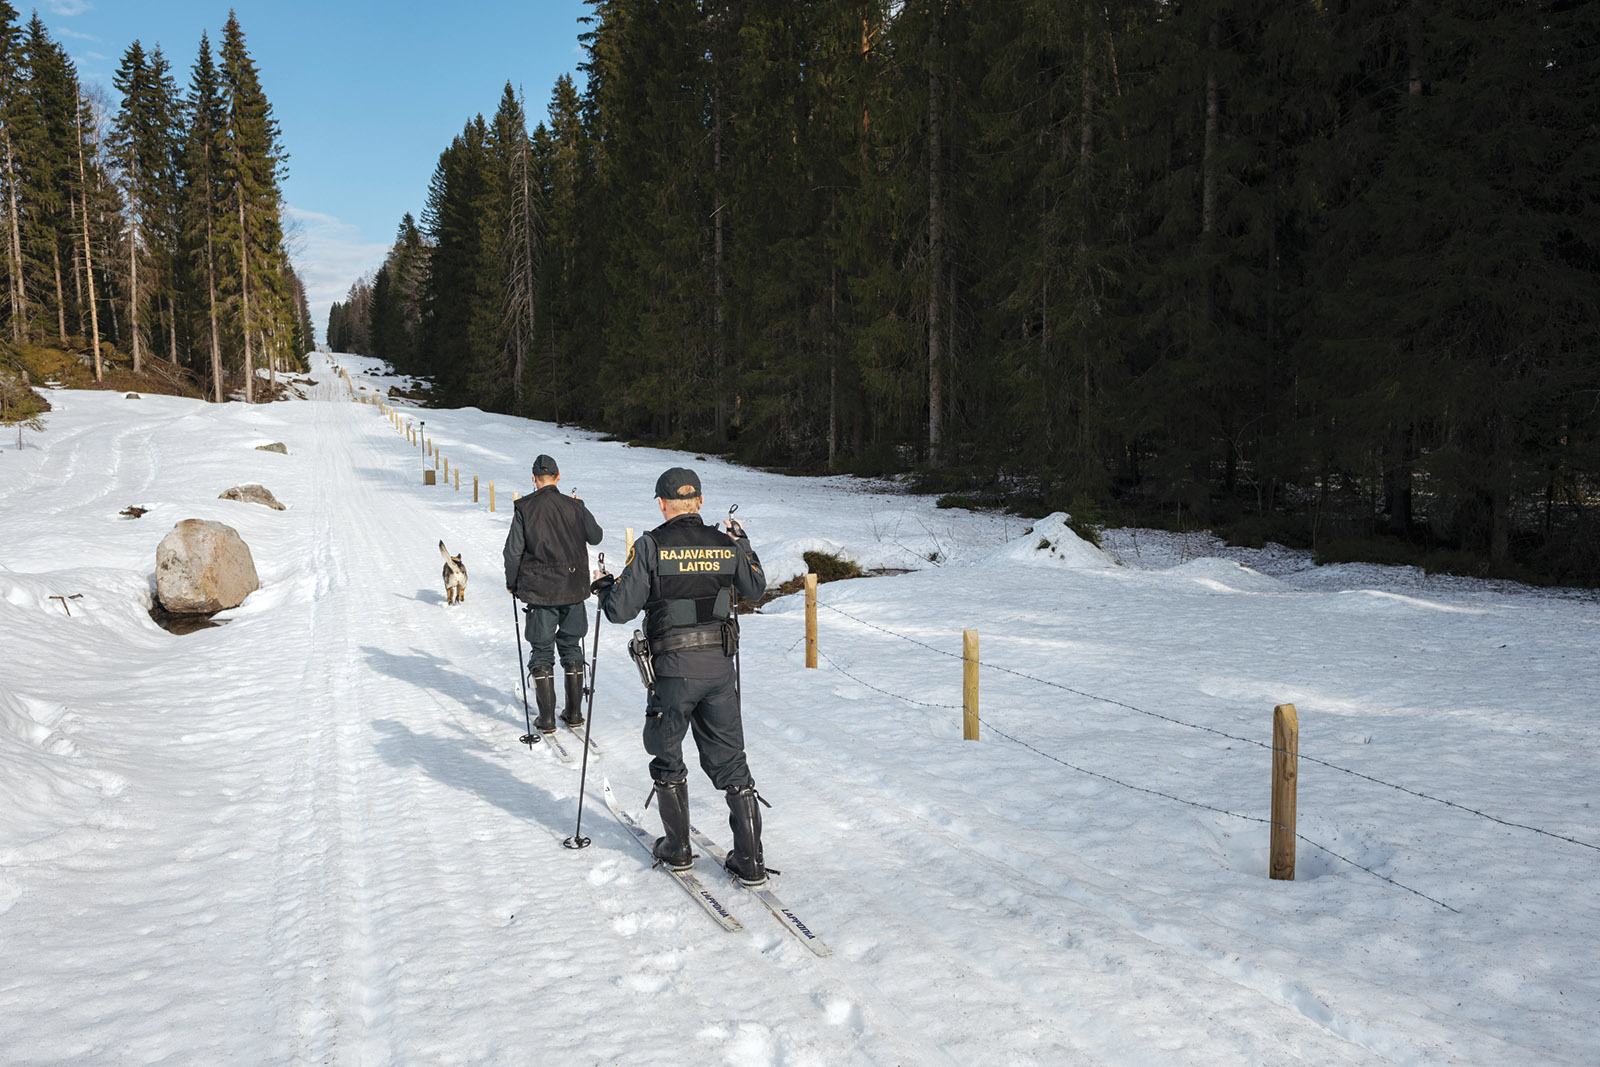 Two guards follow a path on cross country skis with a dog